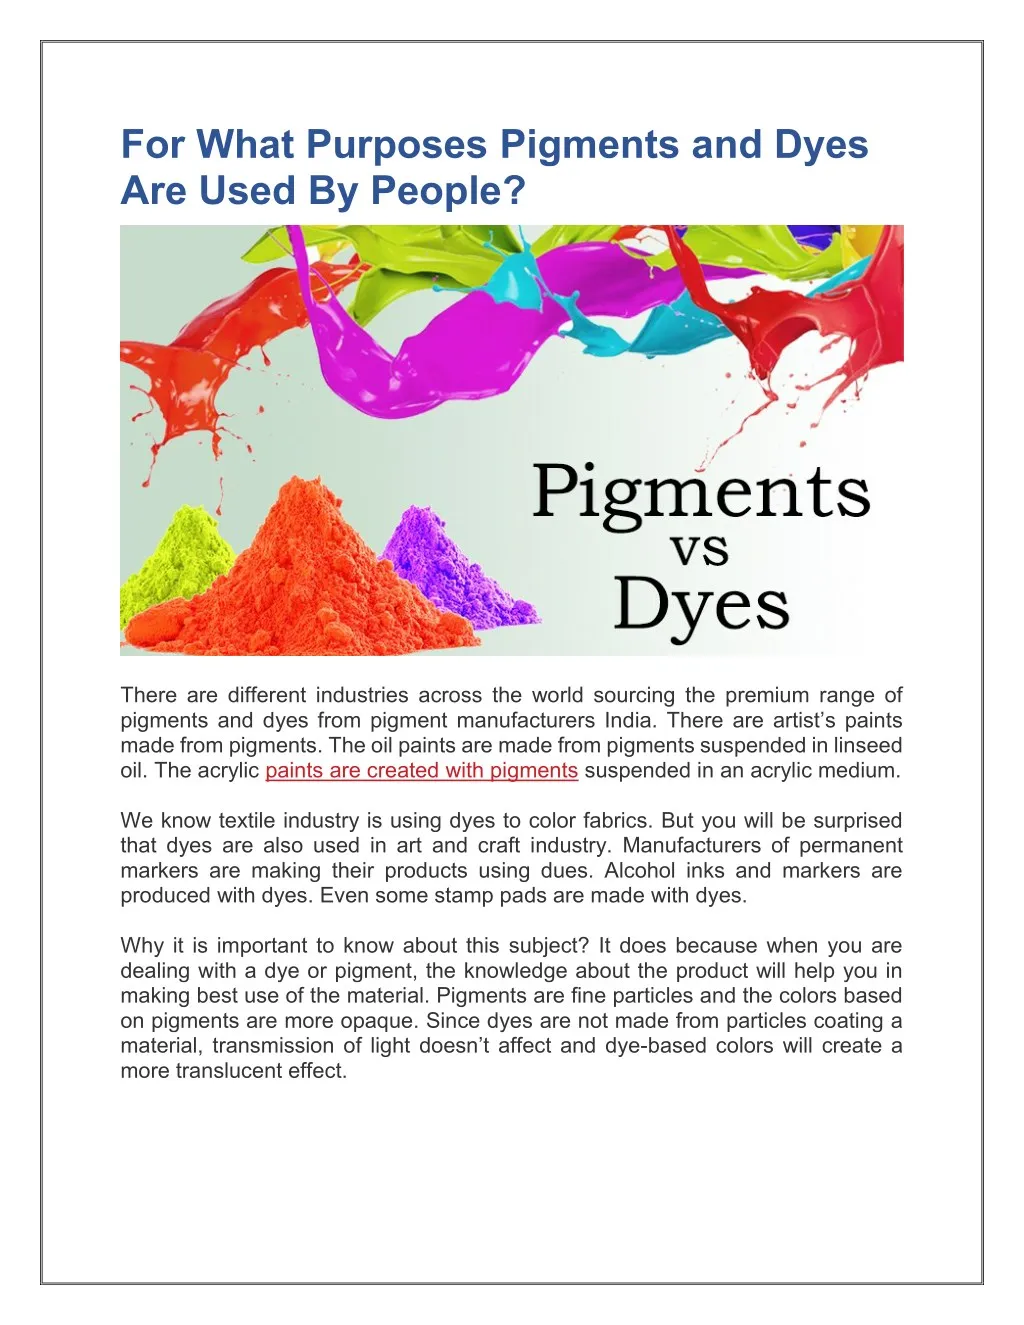 for what purposes pigments and dyes are used